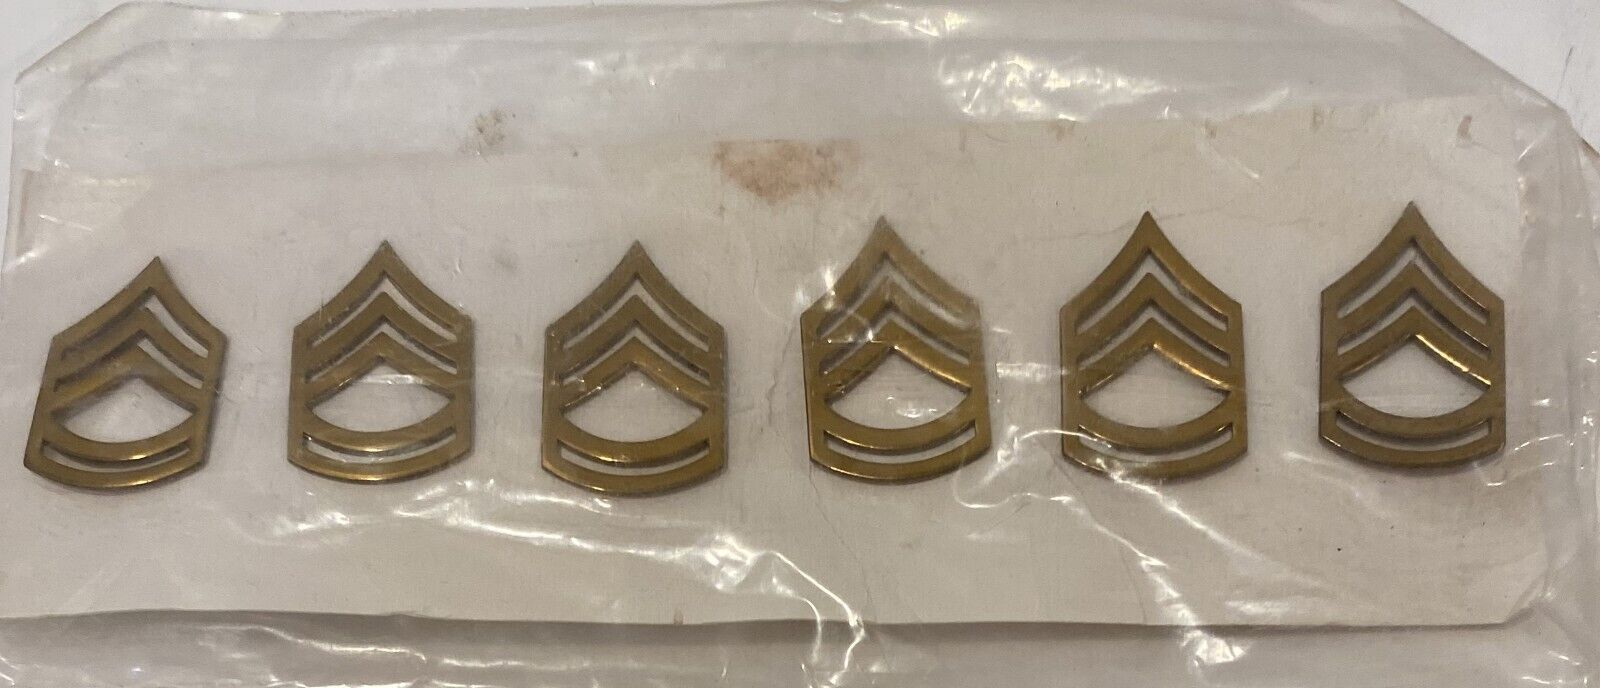 US Army Sergeant First Class E7 Polished Brass Rank Insignia - Three Pair